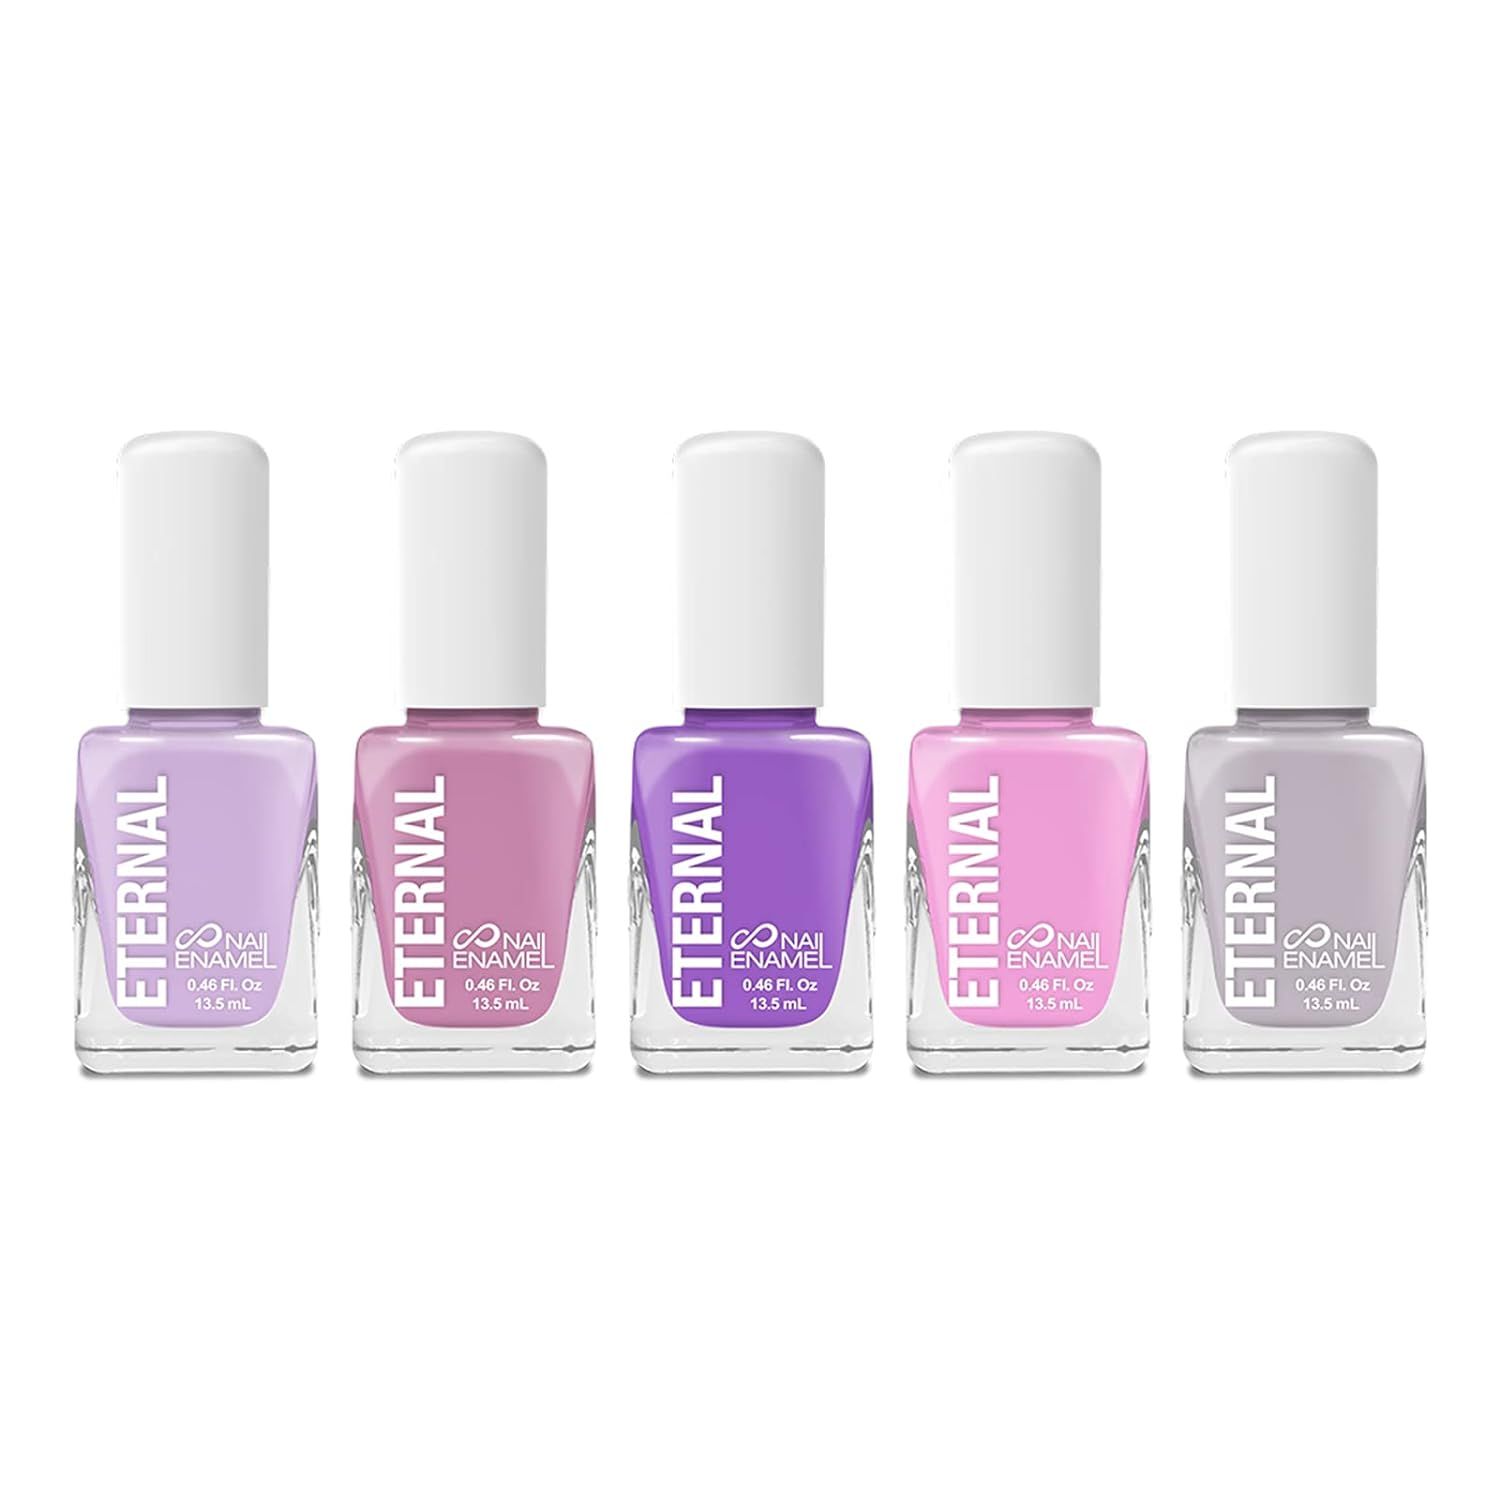 Eternal 5 Collection – 5 Pieces Set: Long Lasting, Quick Dry, Bright, Nude or Sheer Nail Polish... | Amazon (US)